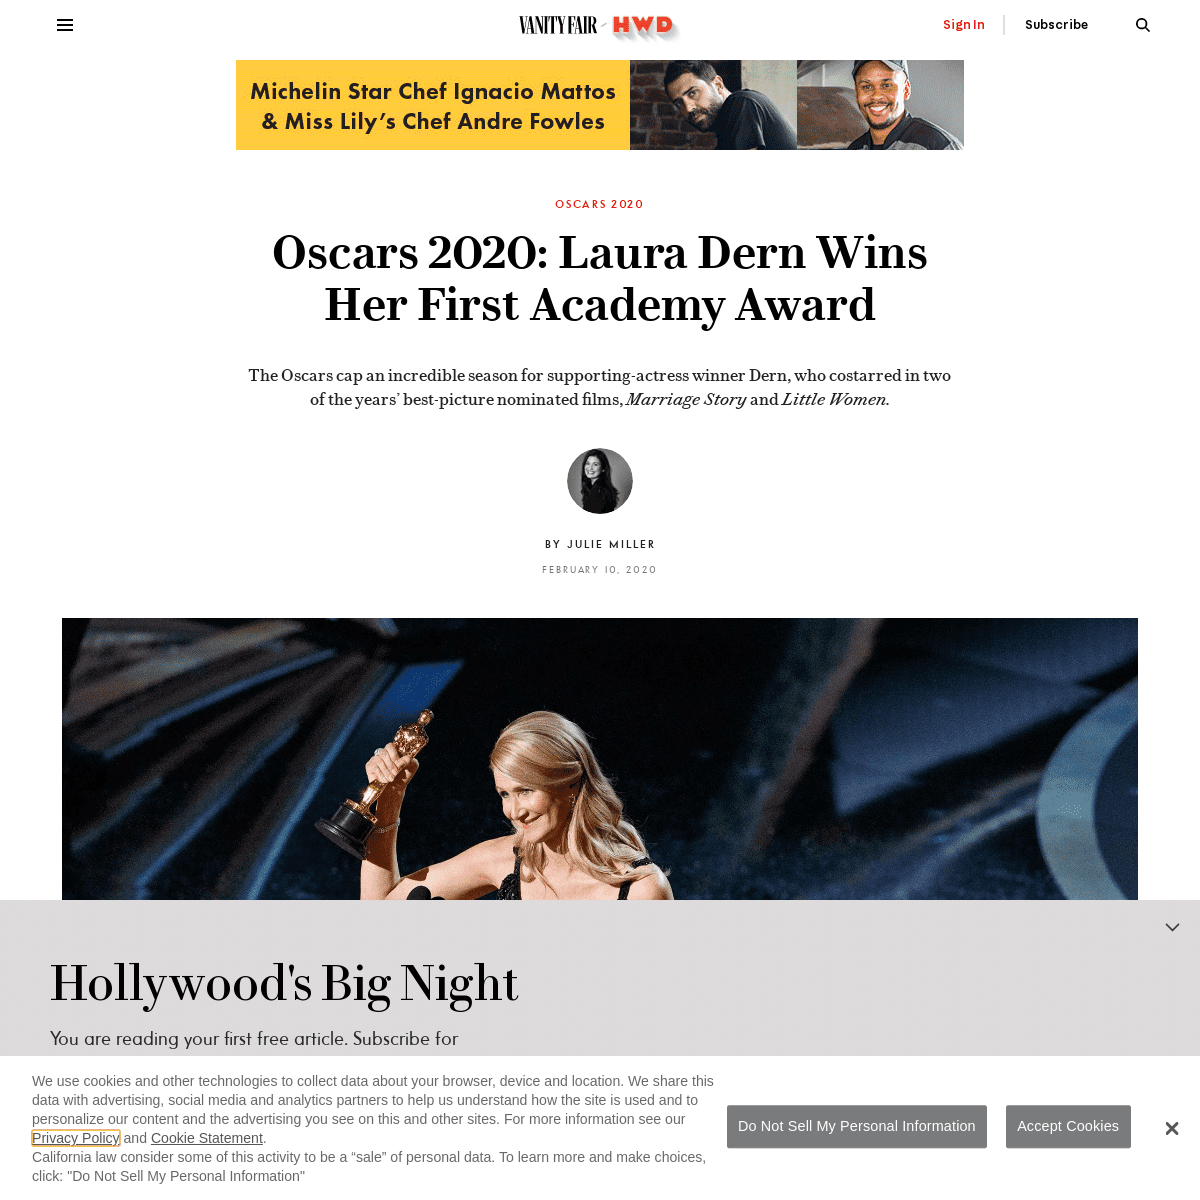 A complete backup of www.vanityfair.com/hollywood/2020/02/laura-dern-oscar-win-best-supporting-actress